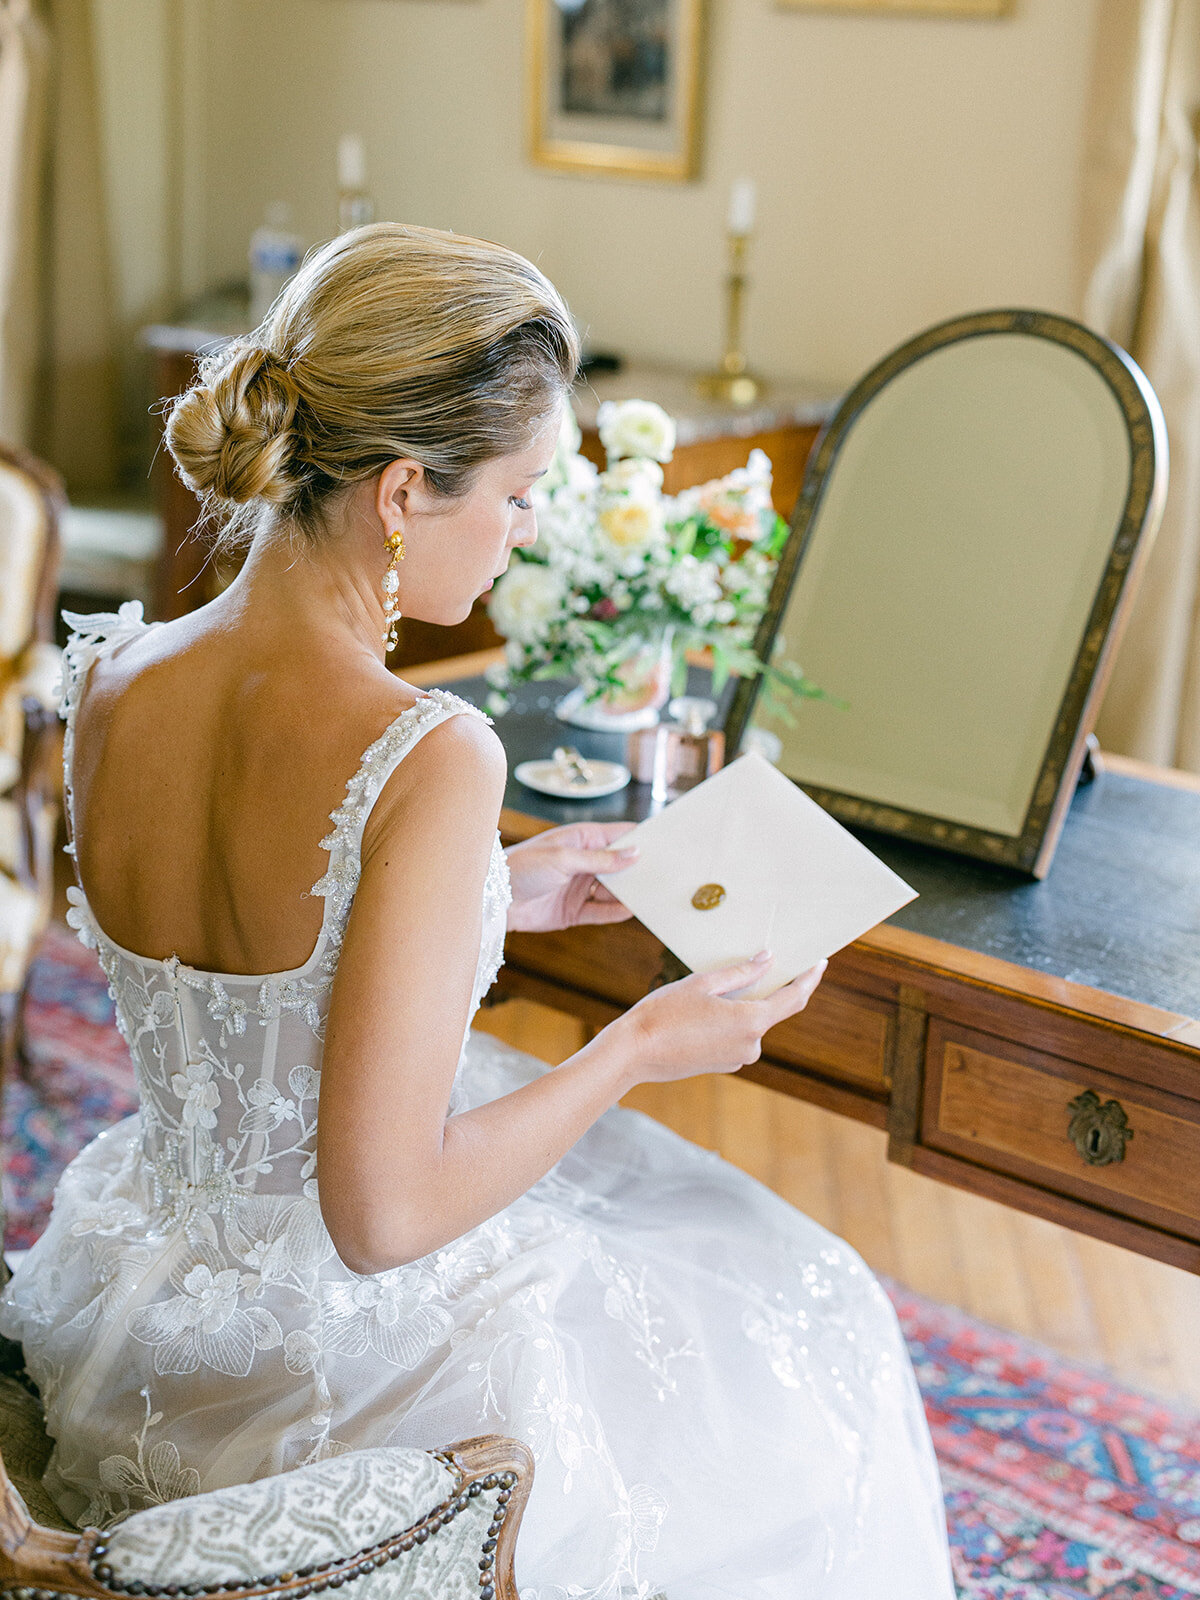 the bride received a love letter